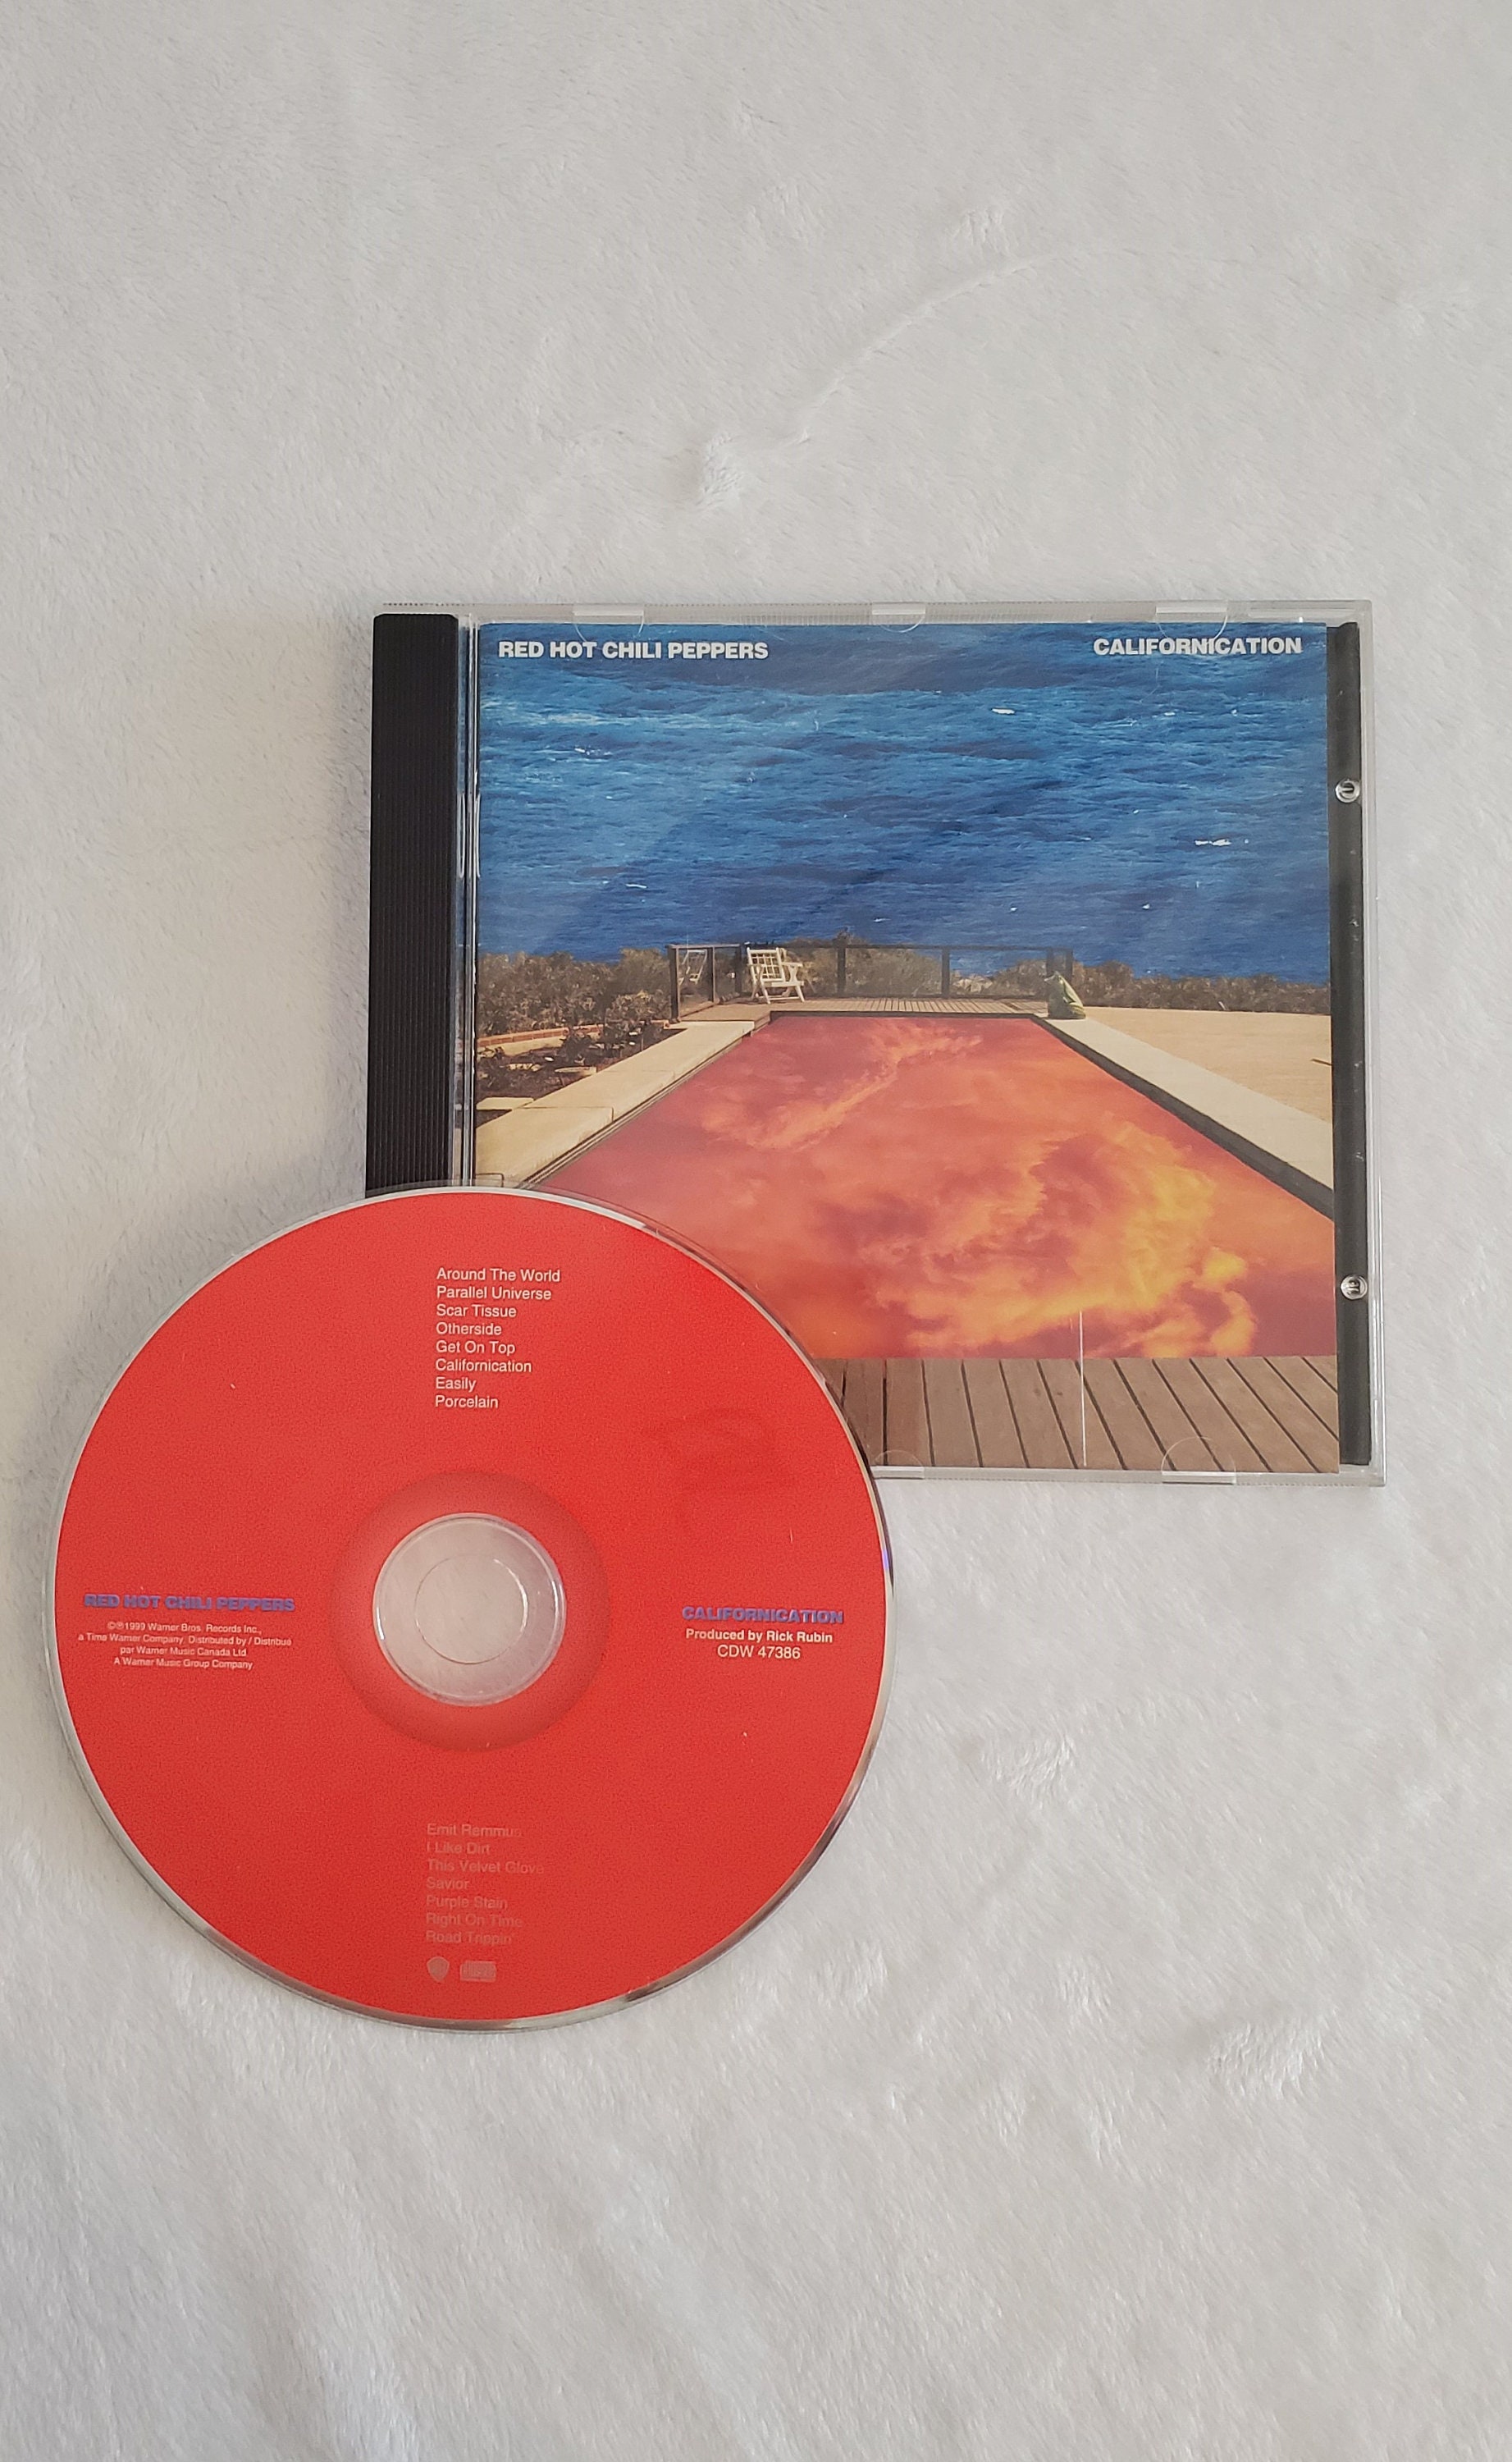 Red Hot Chili Peppers Californication CD From 1999 